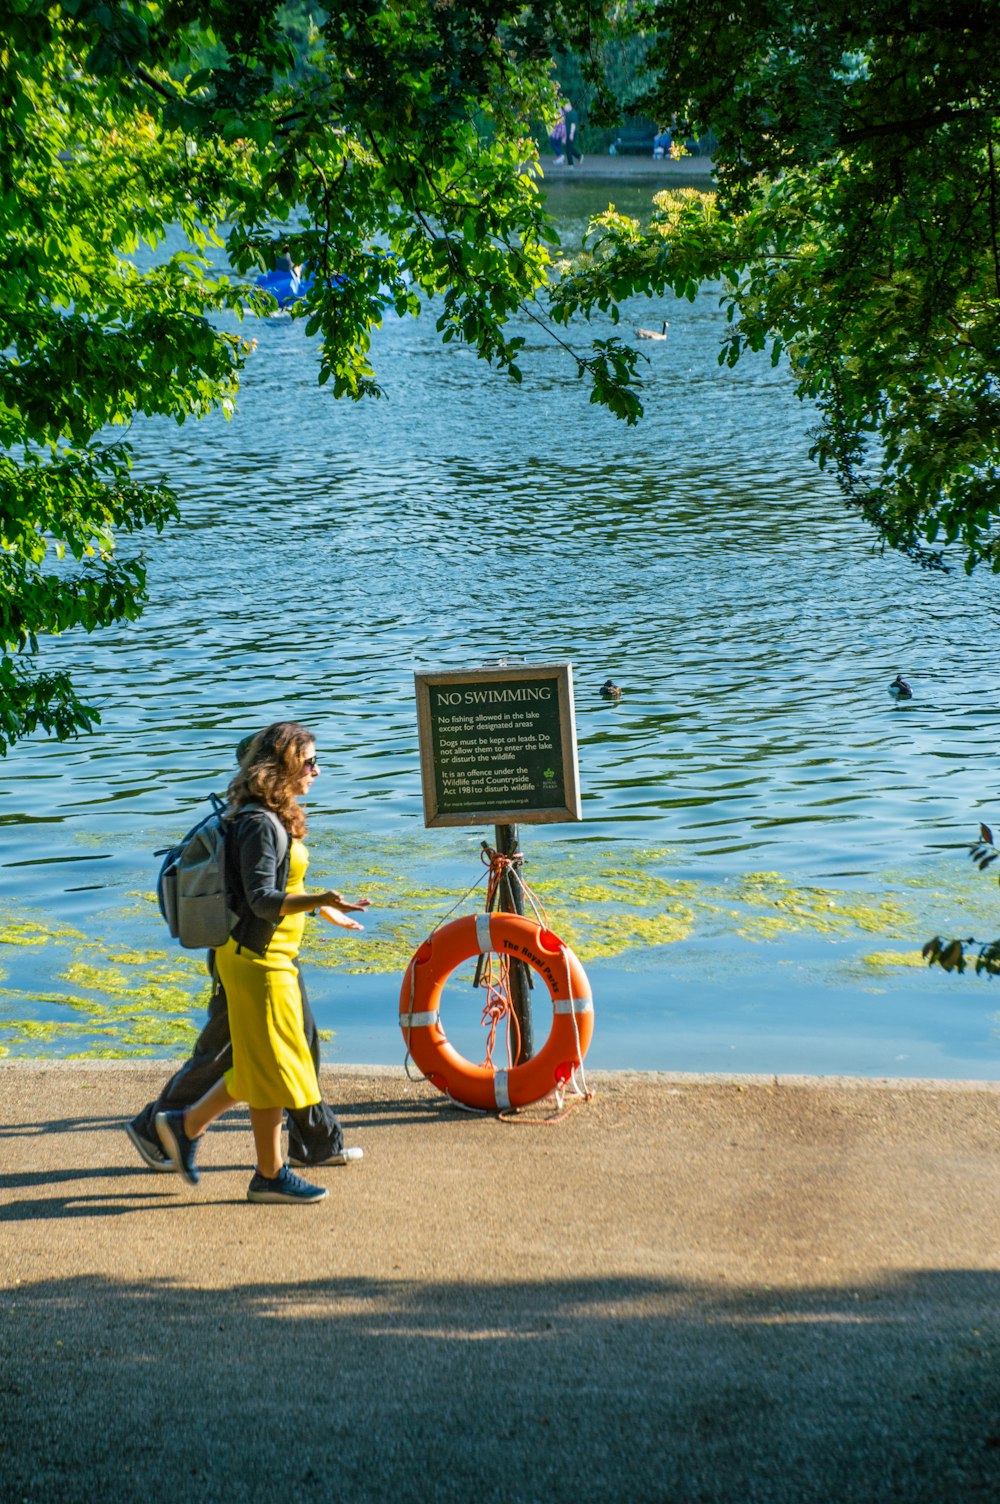 a woman in a yellow dress is walking by the water